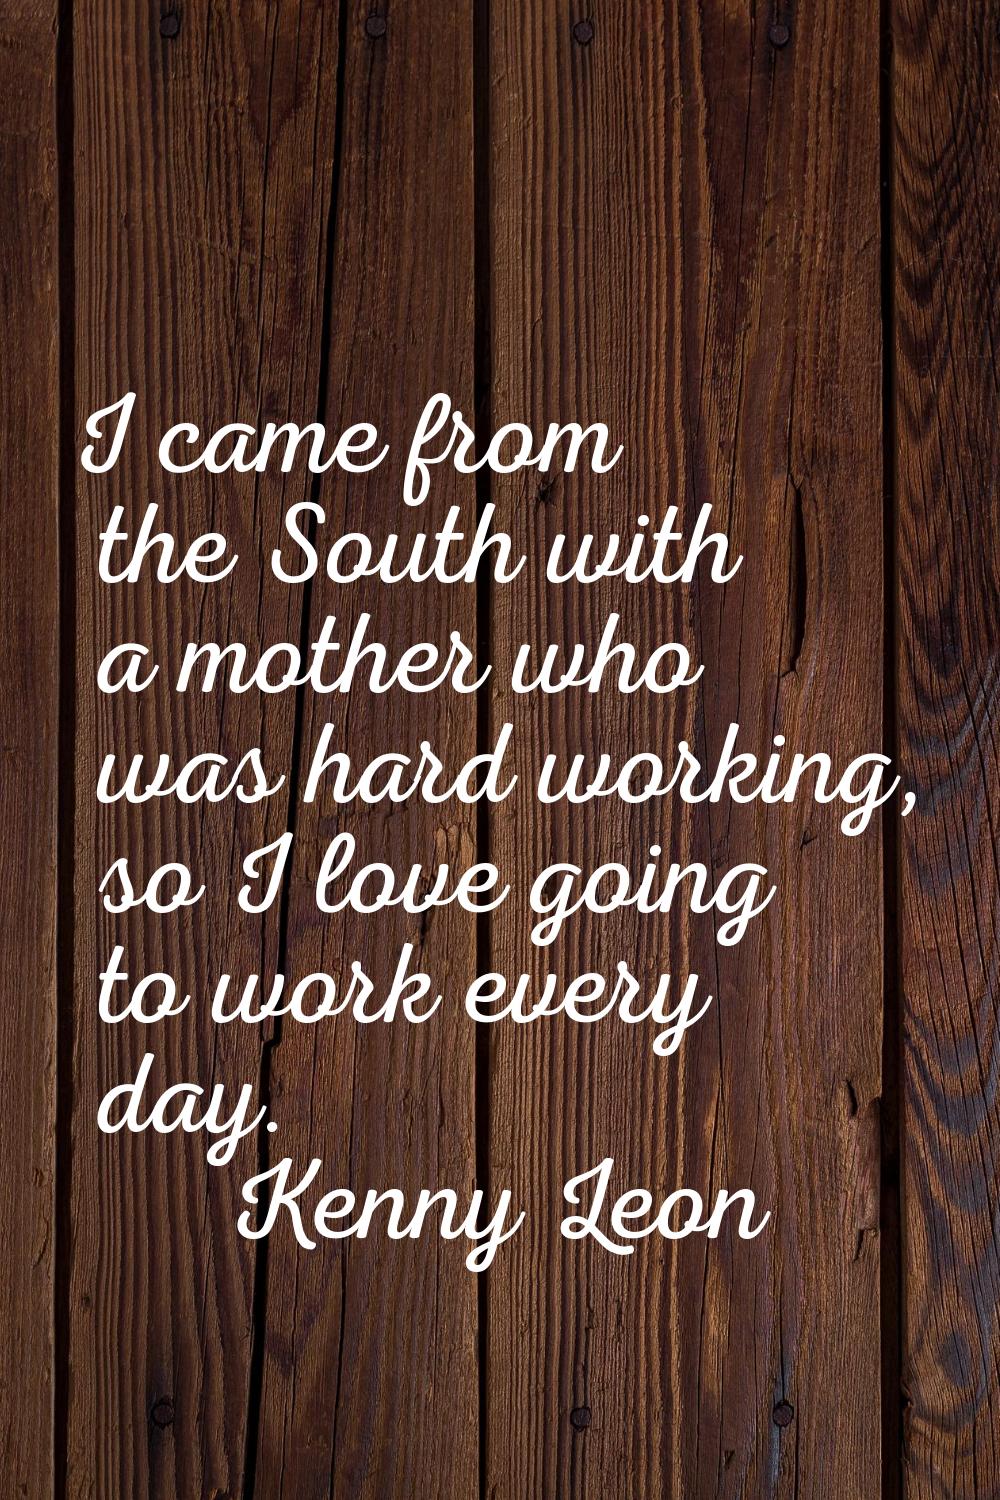 I came from the South with a mother who was hard working, so I love going to work every day.